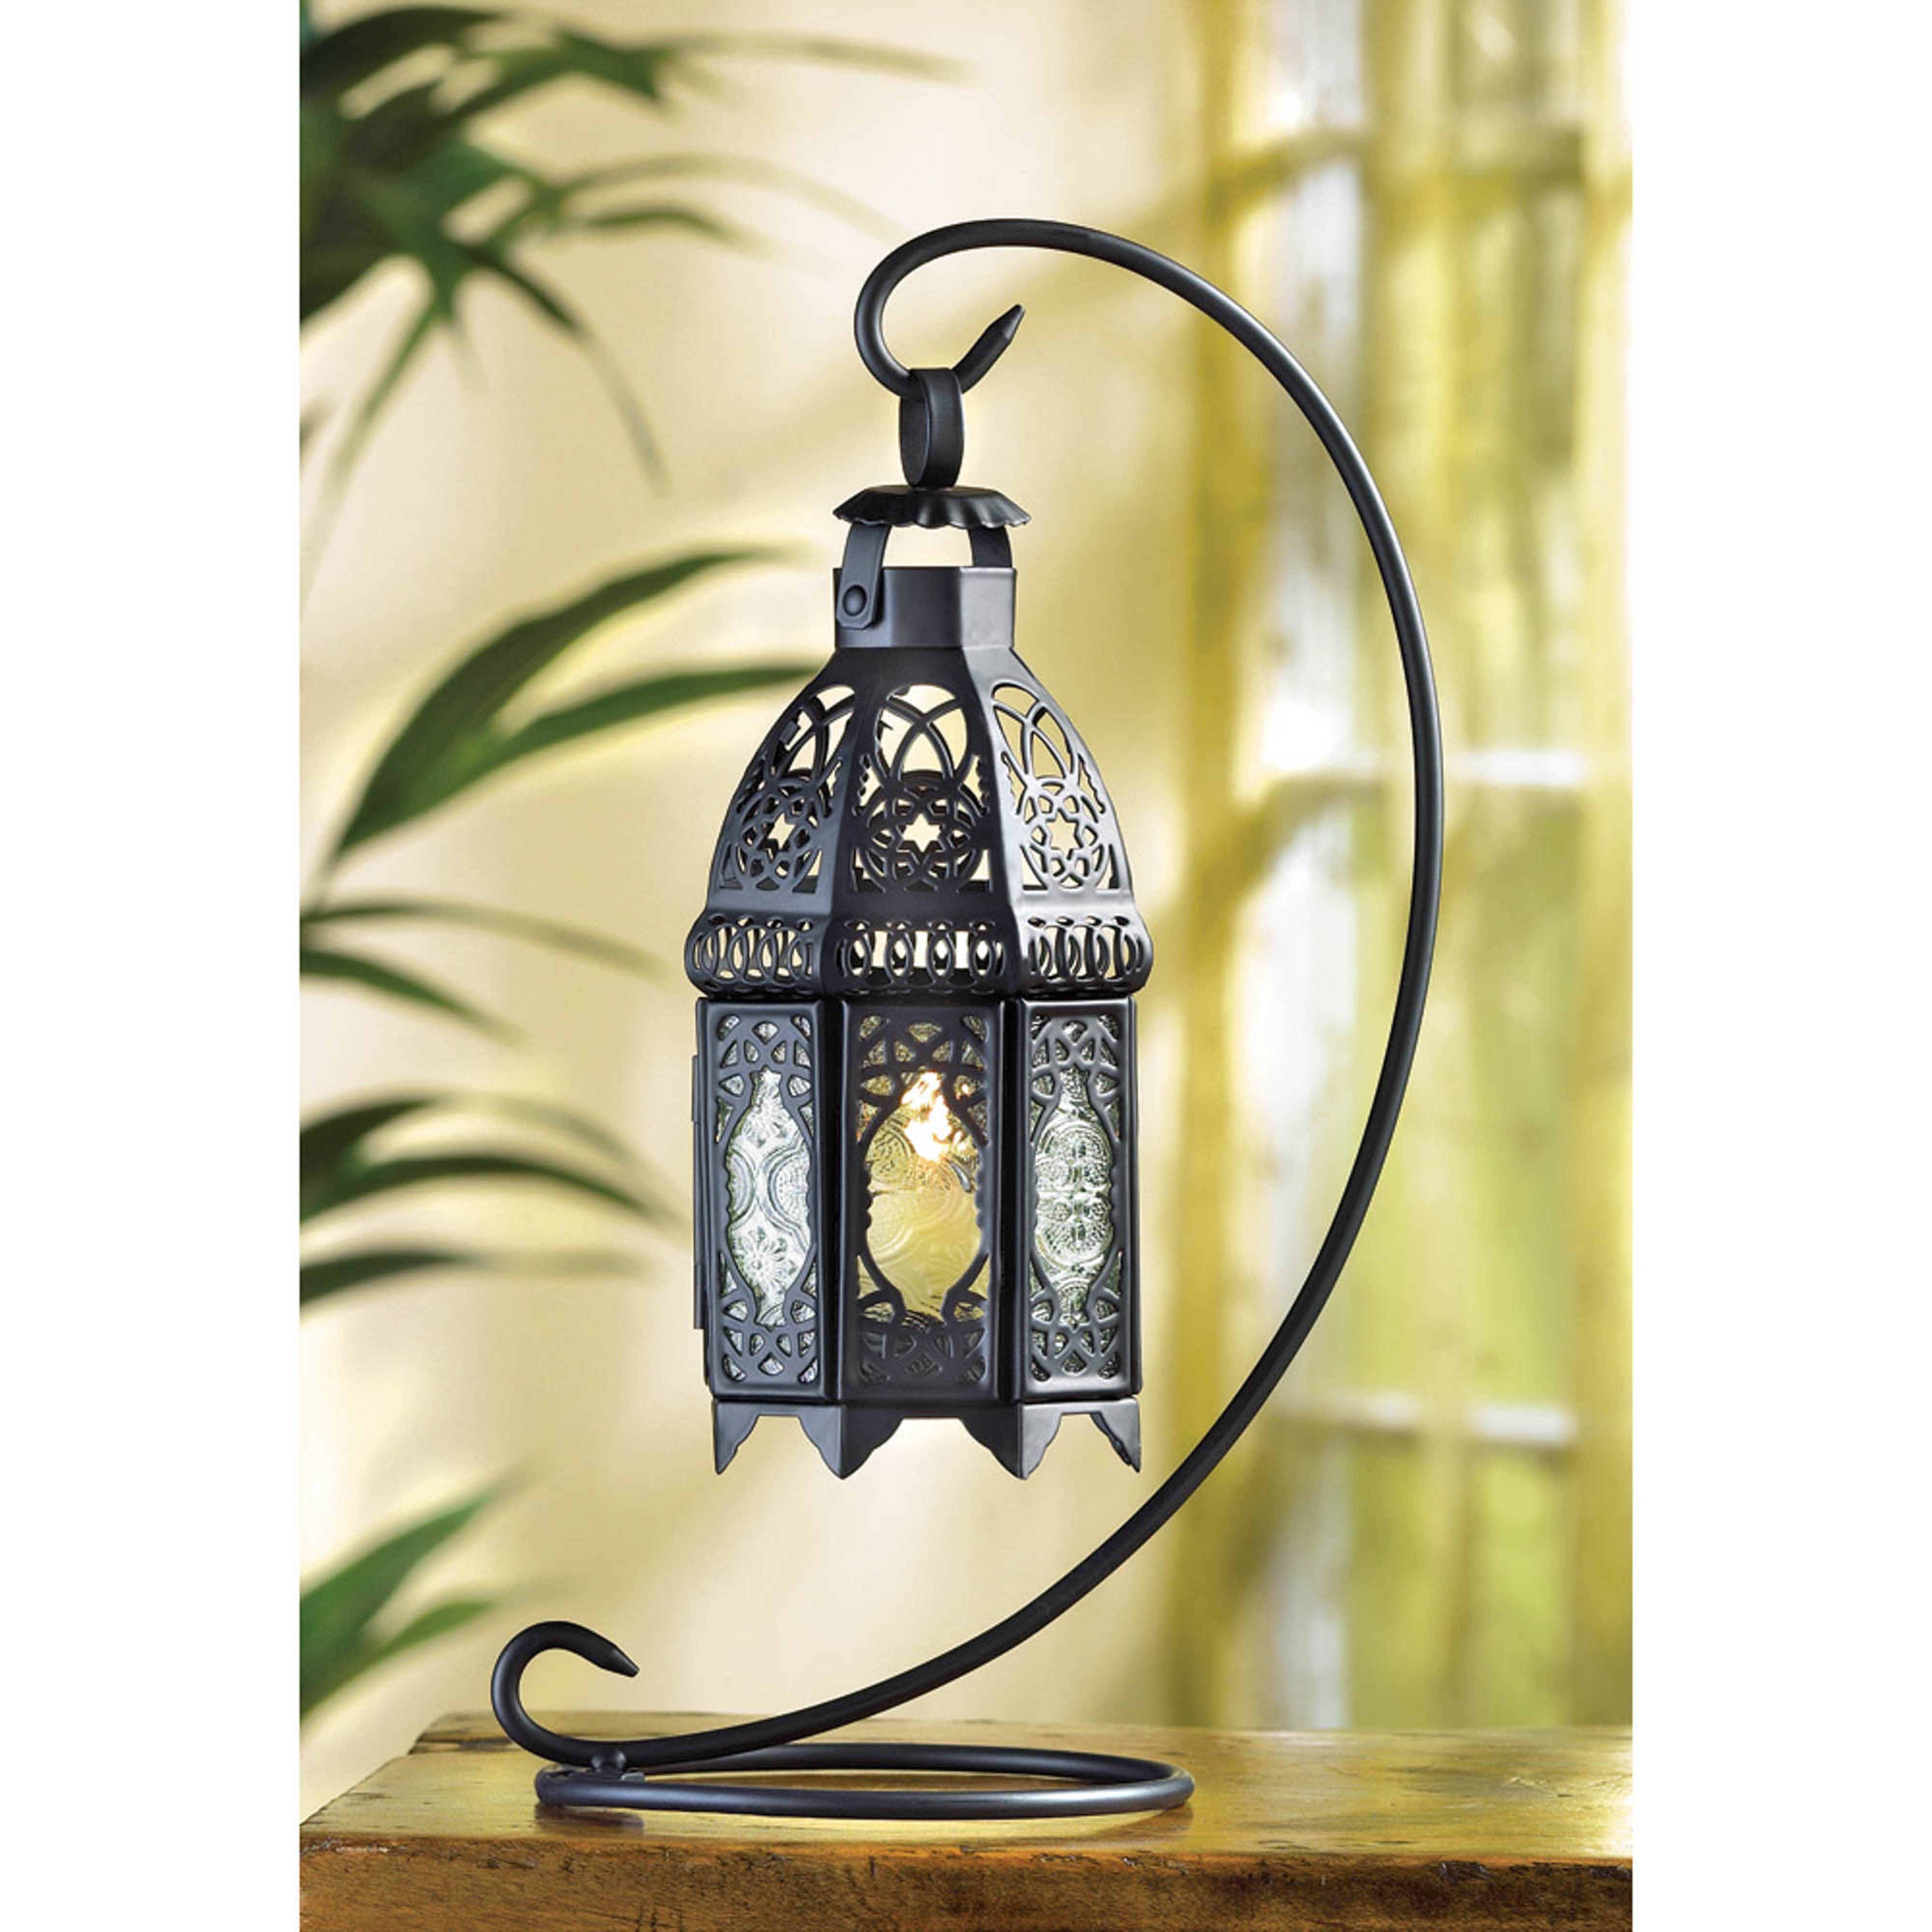 Gifts & Decor Moroccan Tabletop Lantern Ornate Metal Candle Holder 